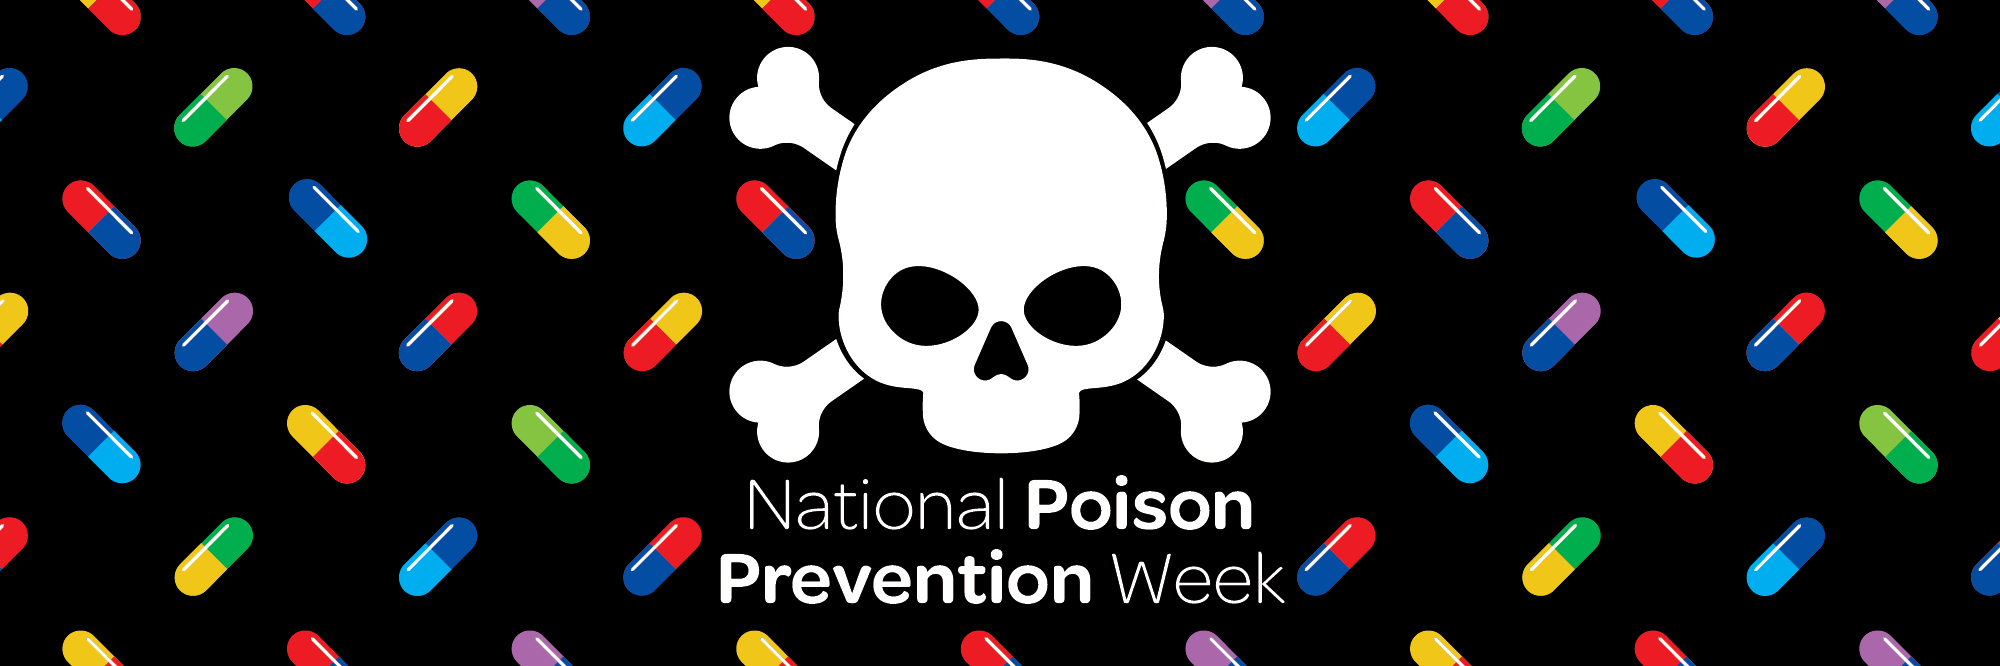 national poison prevention week